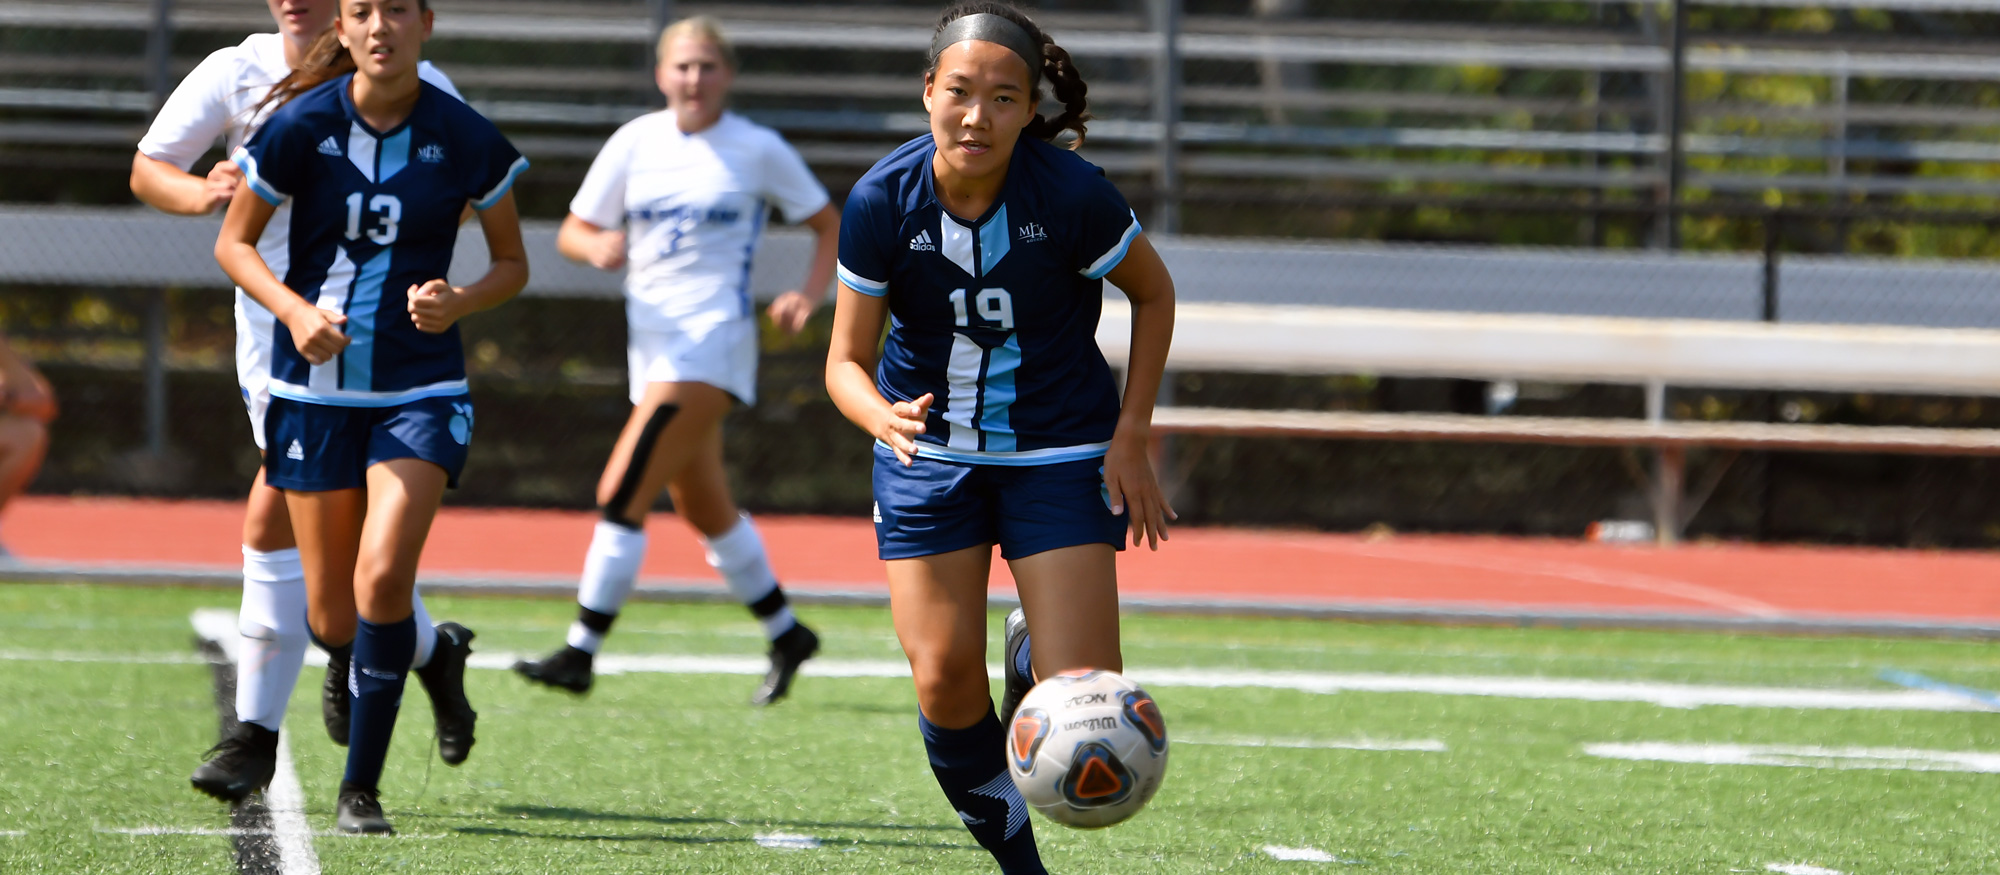 Juddy Nam put a shot on goal in the second half of Mount Holyoke's 4-0 loss at Western New England on Sept. 28, 2022. (RJB Sports file photo)